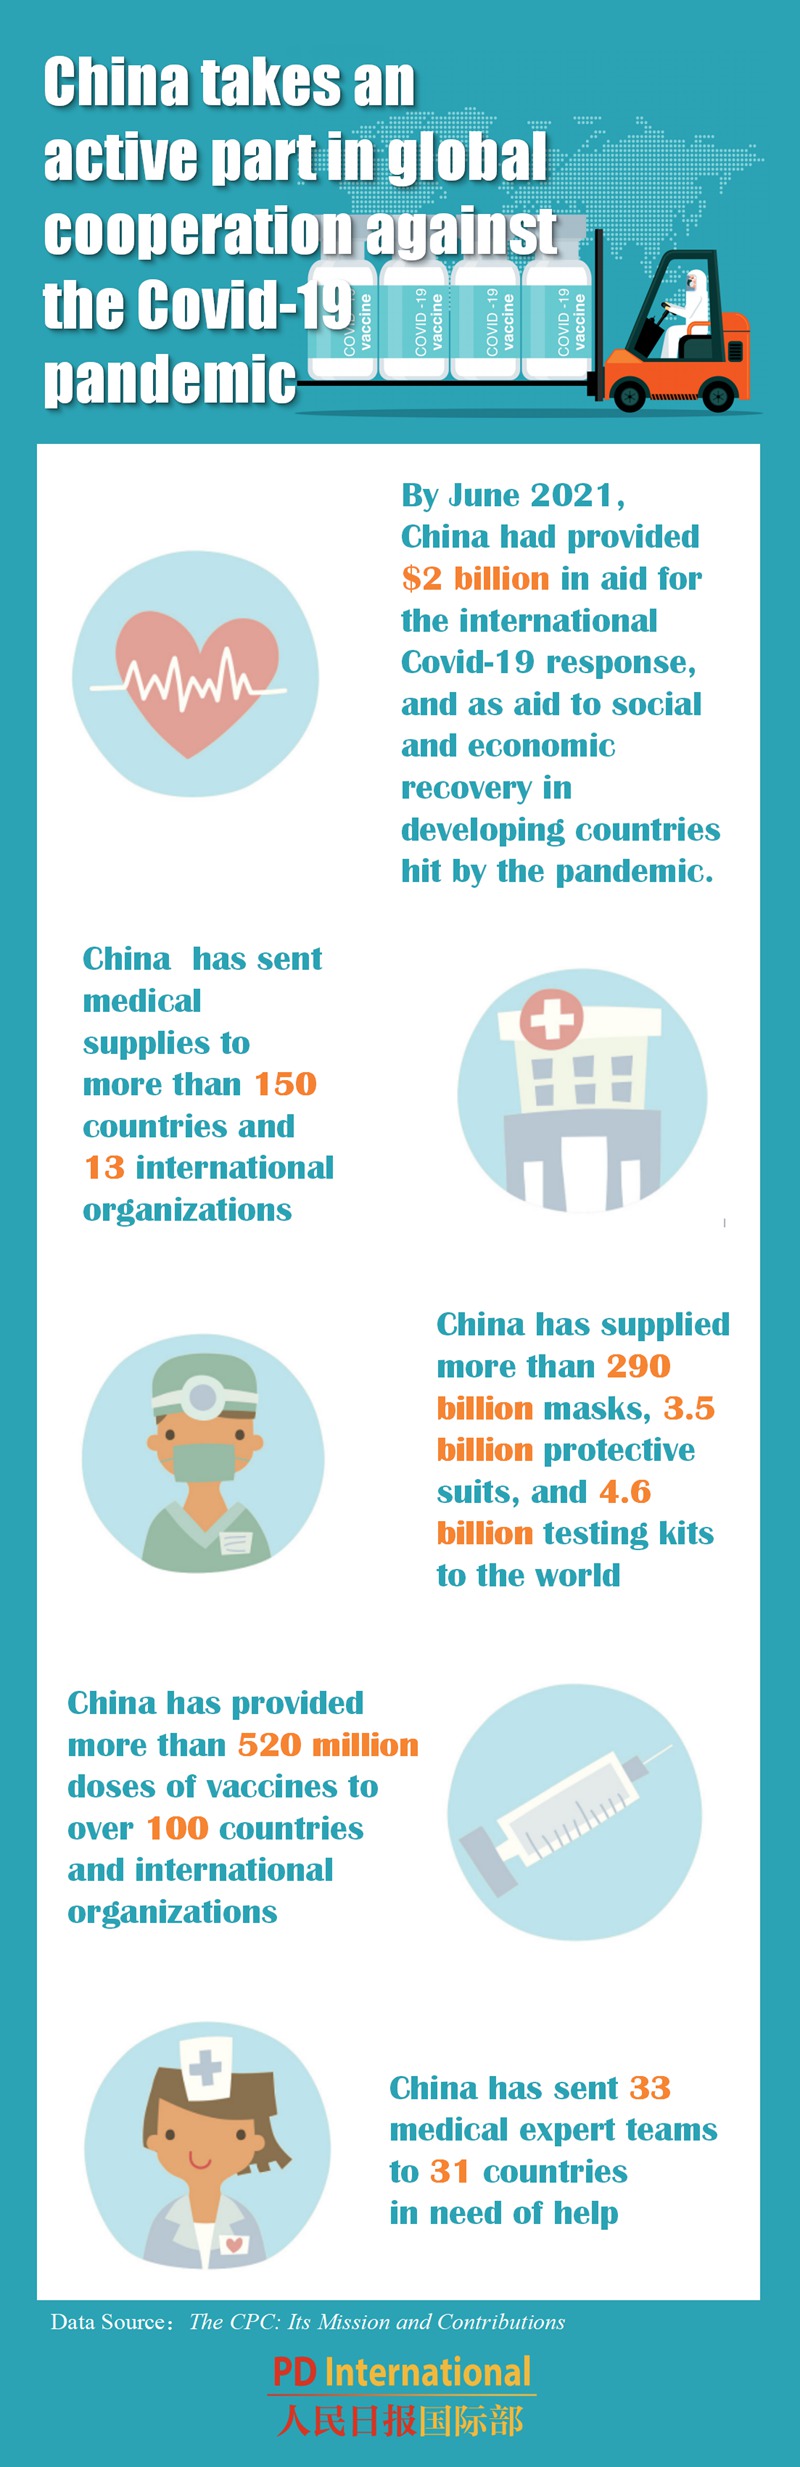 Infographic: China takes an active part in global cooperation against the COVID-19 pandemic